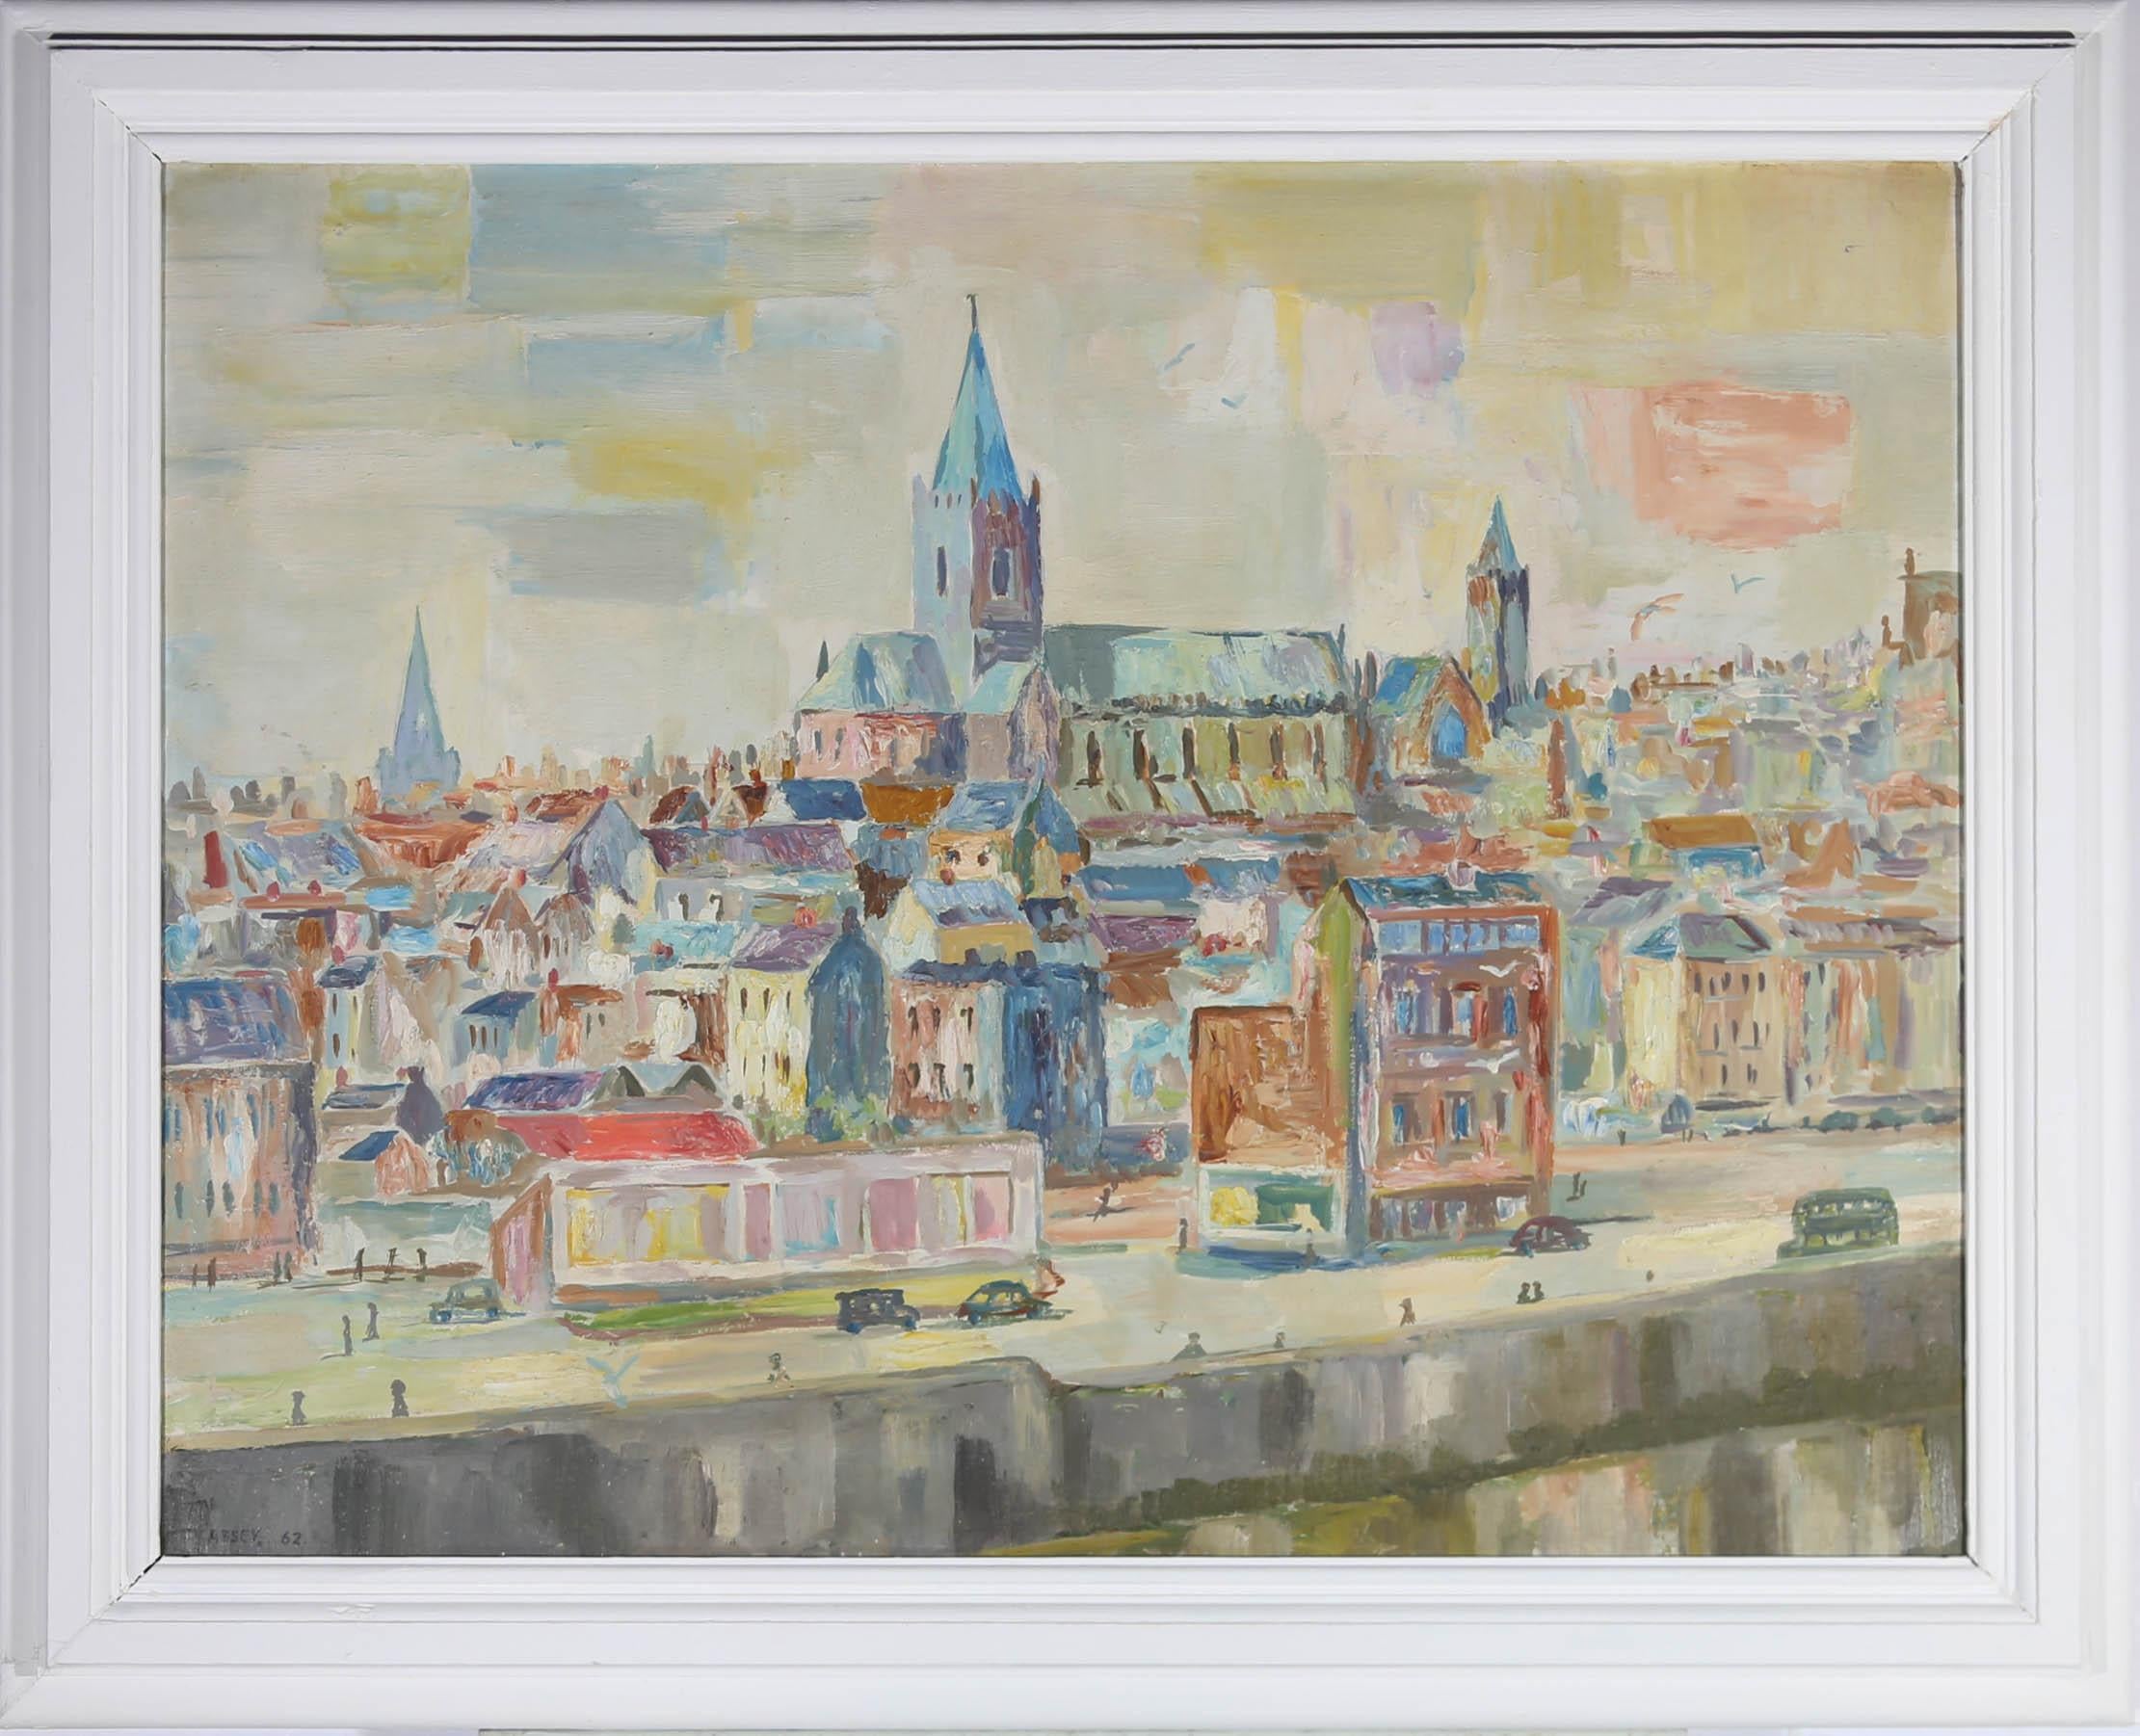 A delightful impressionist style study of a city that is thought to be Cork in the Republic of Ireland by Irish artist Tom McAssey. He captures the colourful city buildings in pastel colours with a palette knife, achieving a textured, vibrant scene.